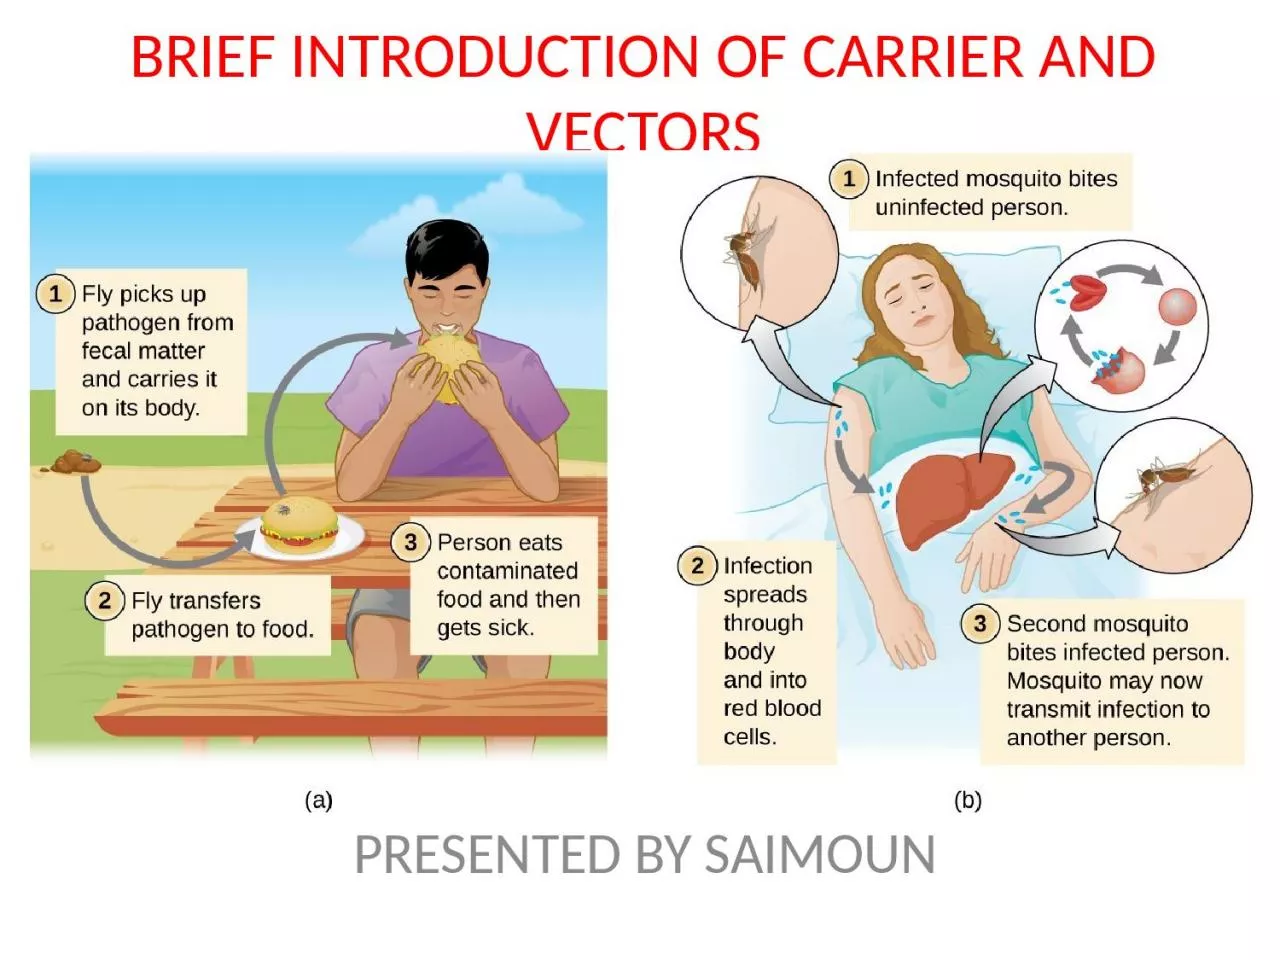 BRIEF INTRODUCTION OF CARRIER AND VECTORS